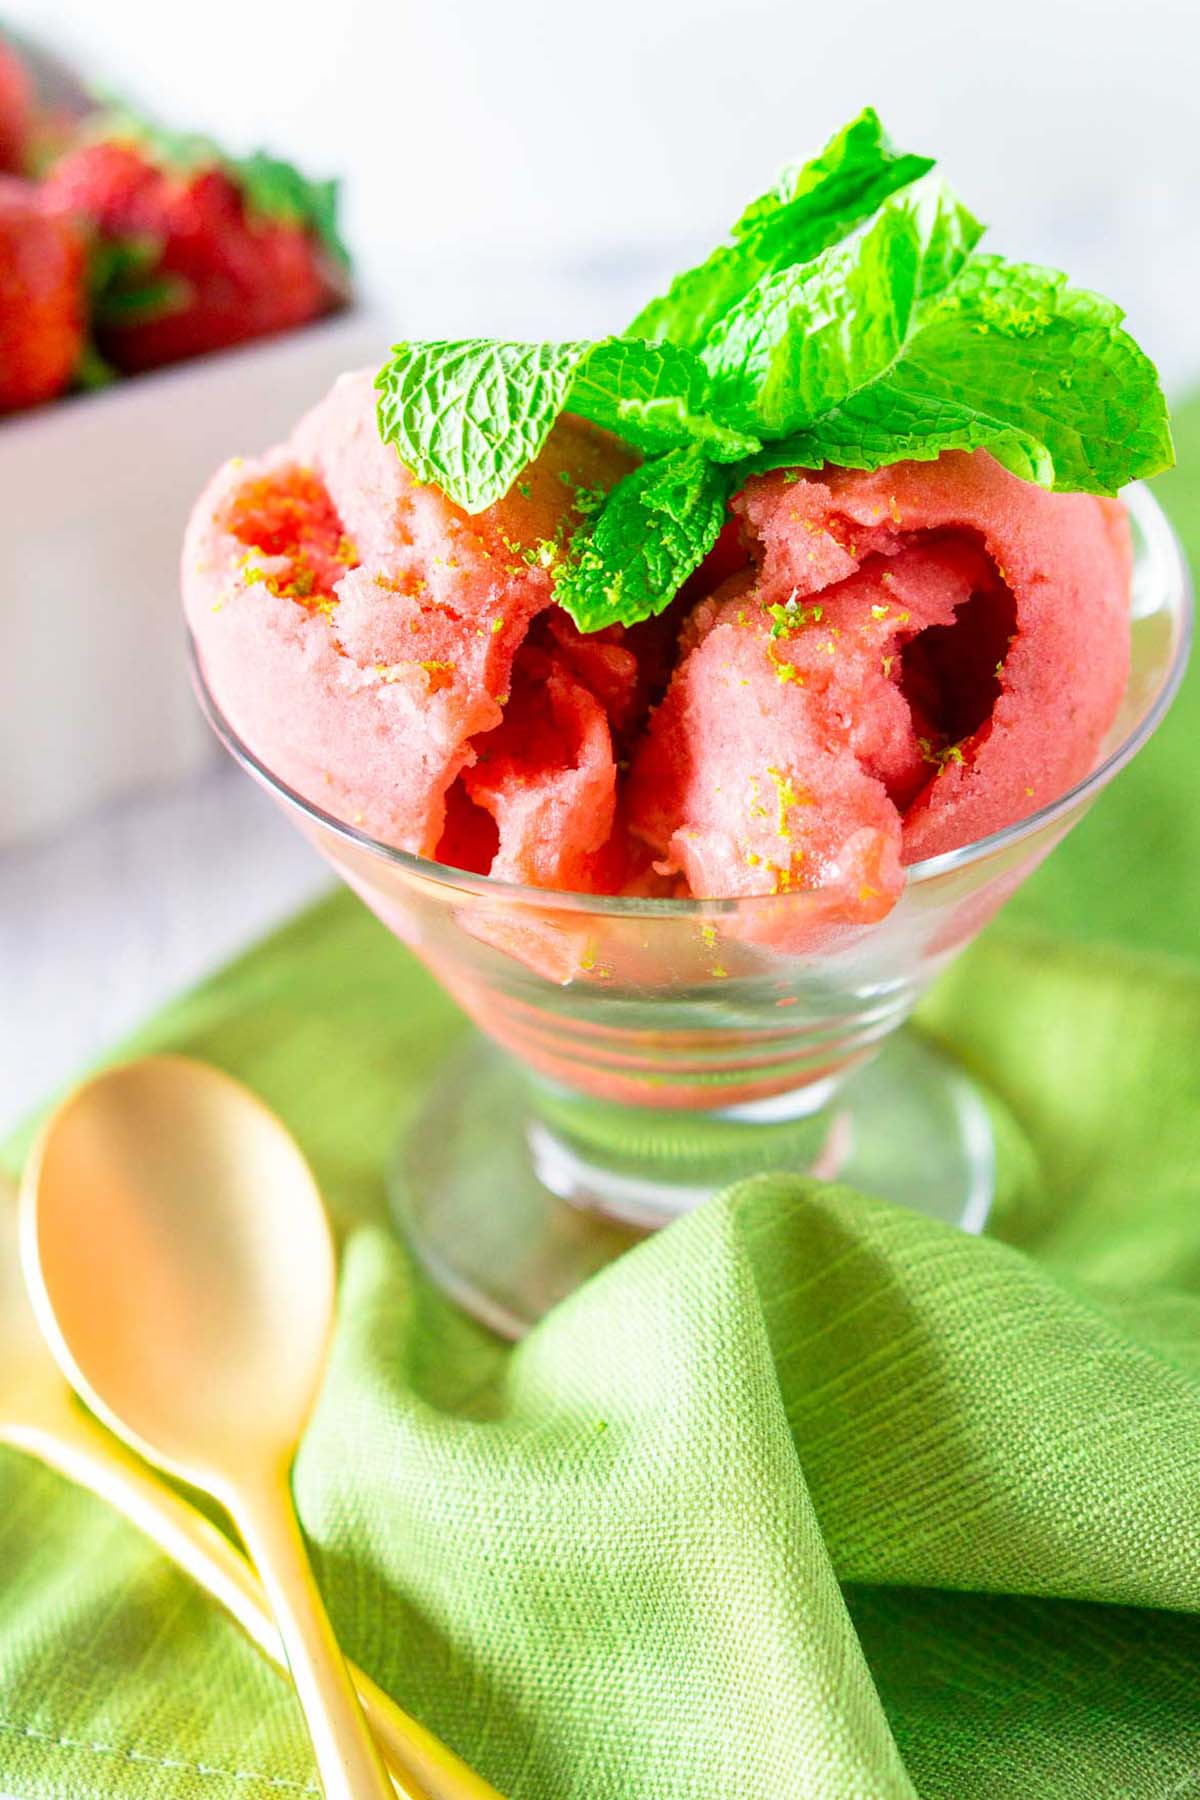 strawberry and mint sorbet in serving bowl.